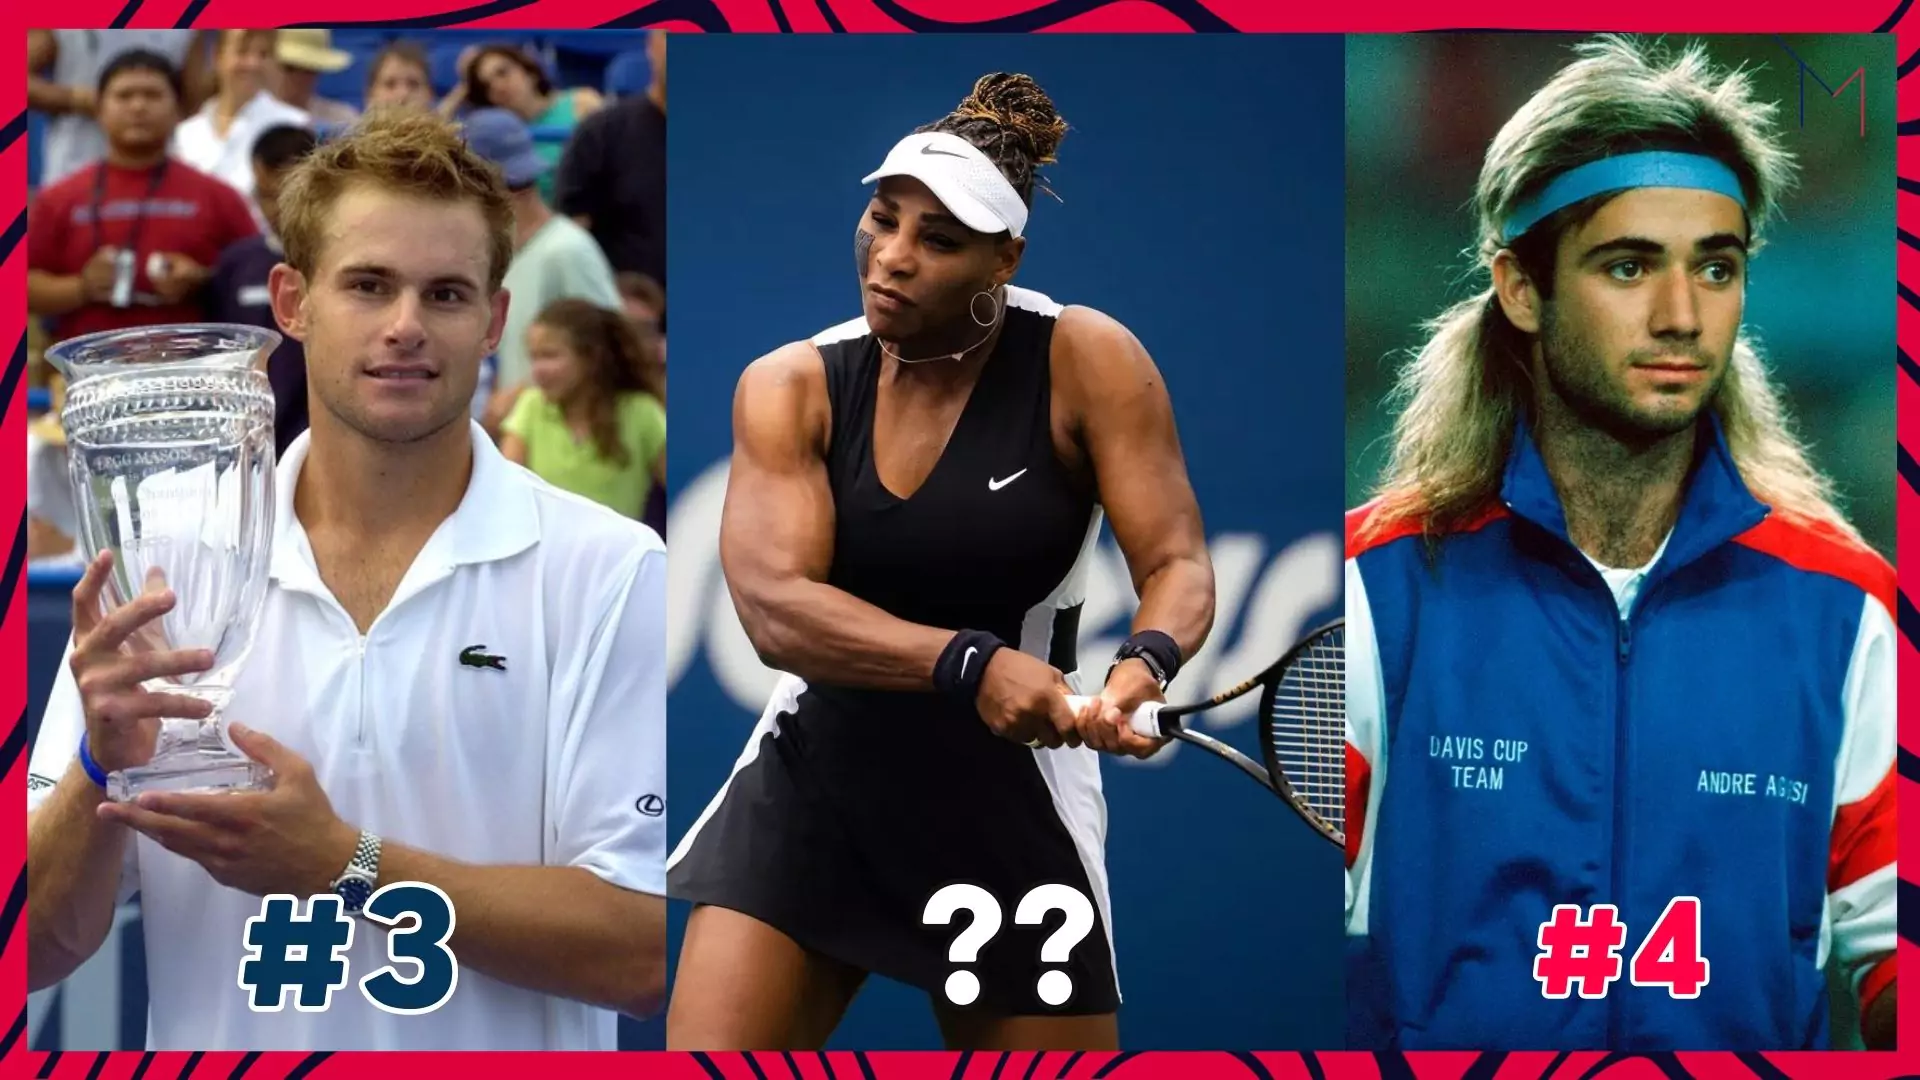 Top 10 most popular tennis players from the USA of All Time - Famous tennis players from America